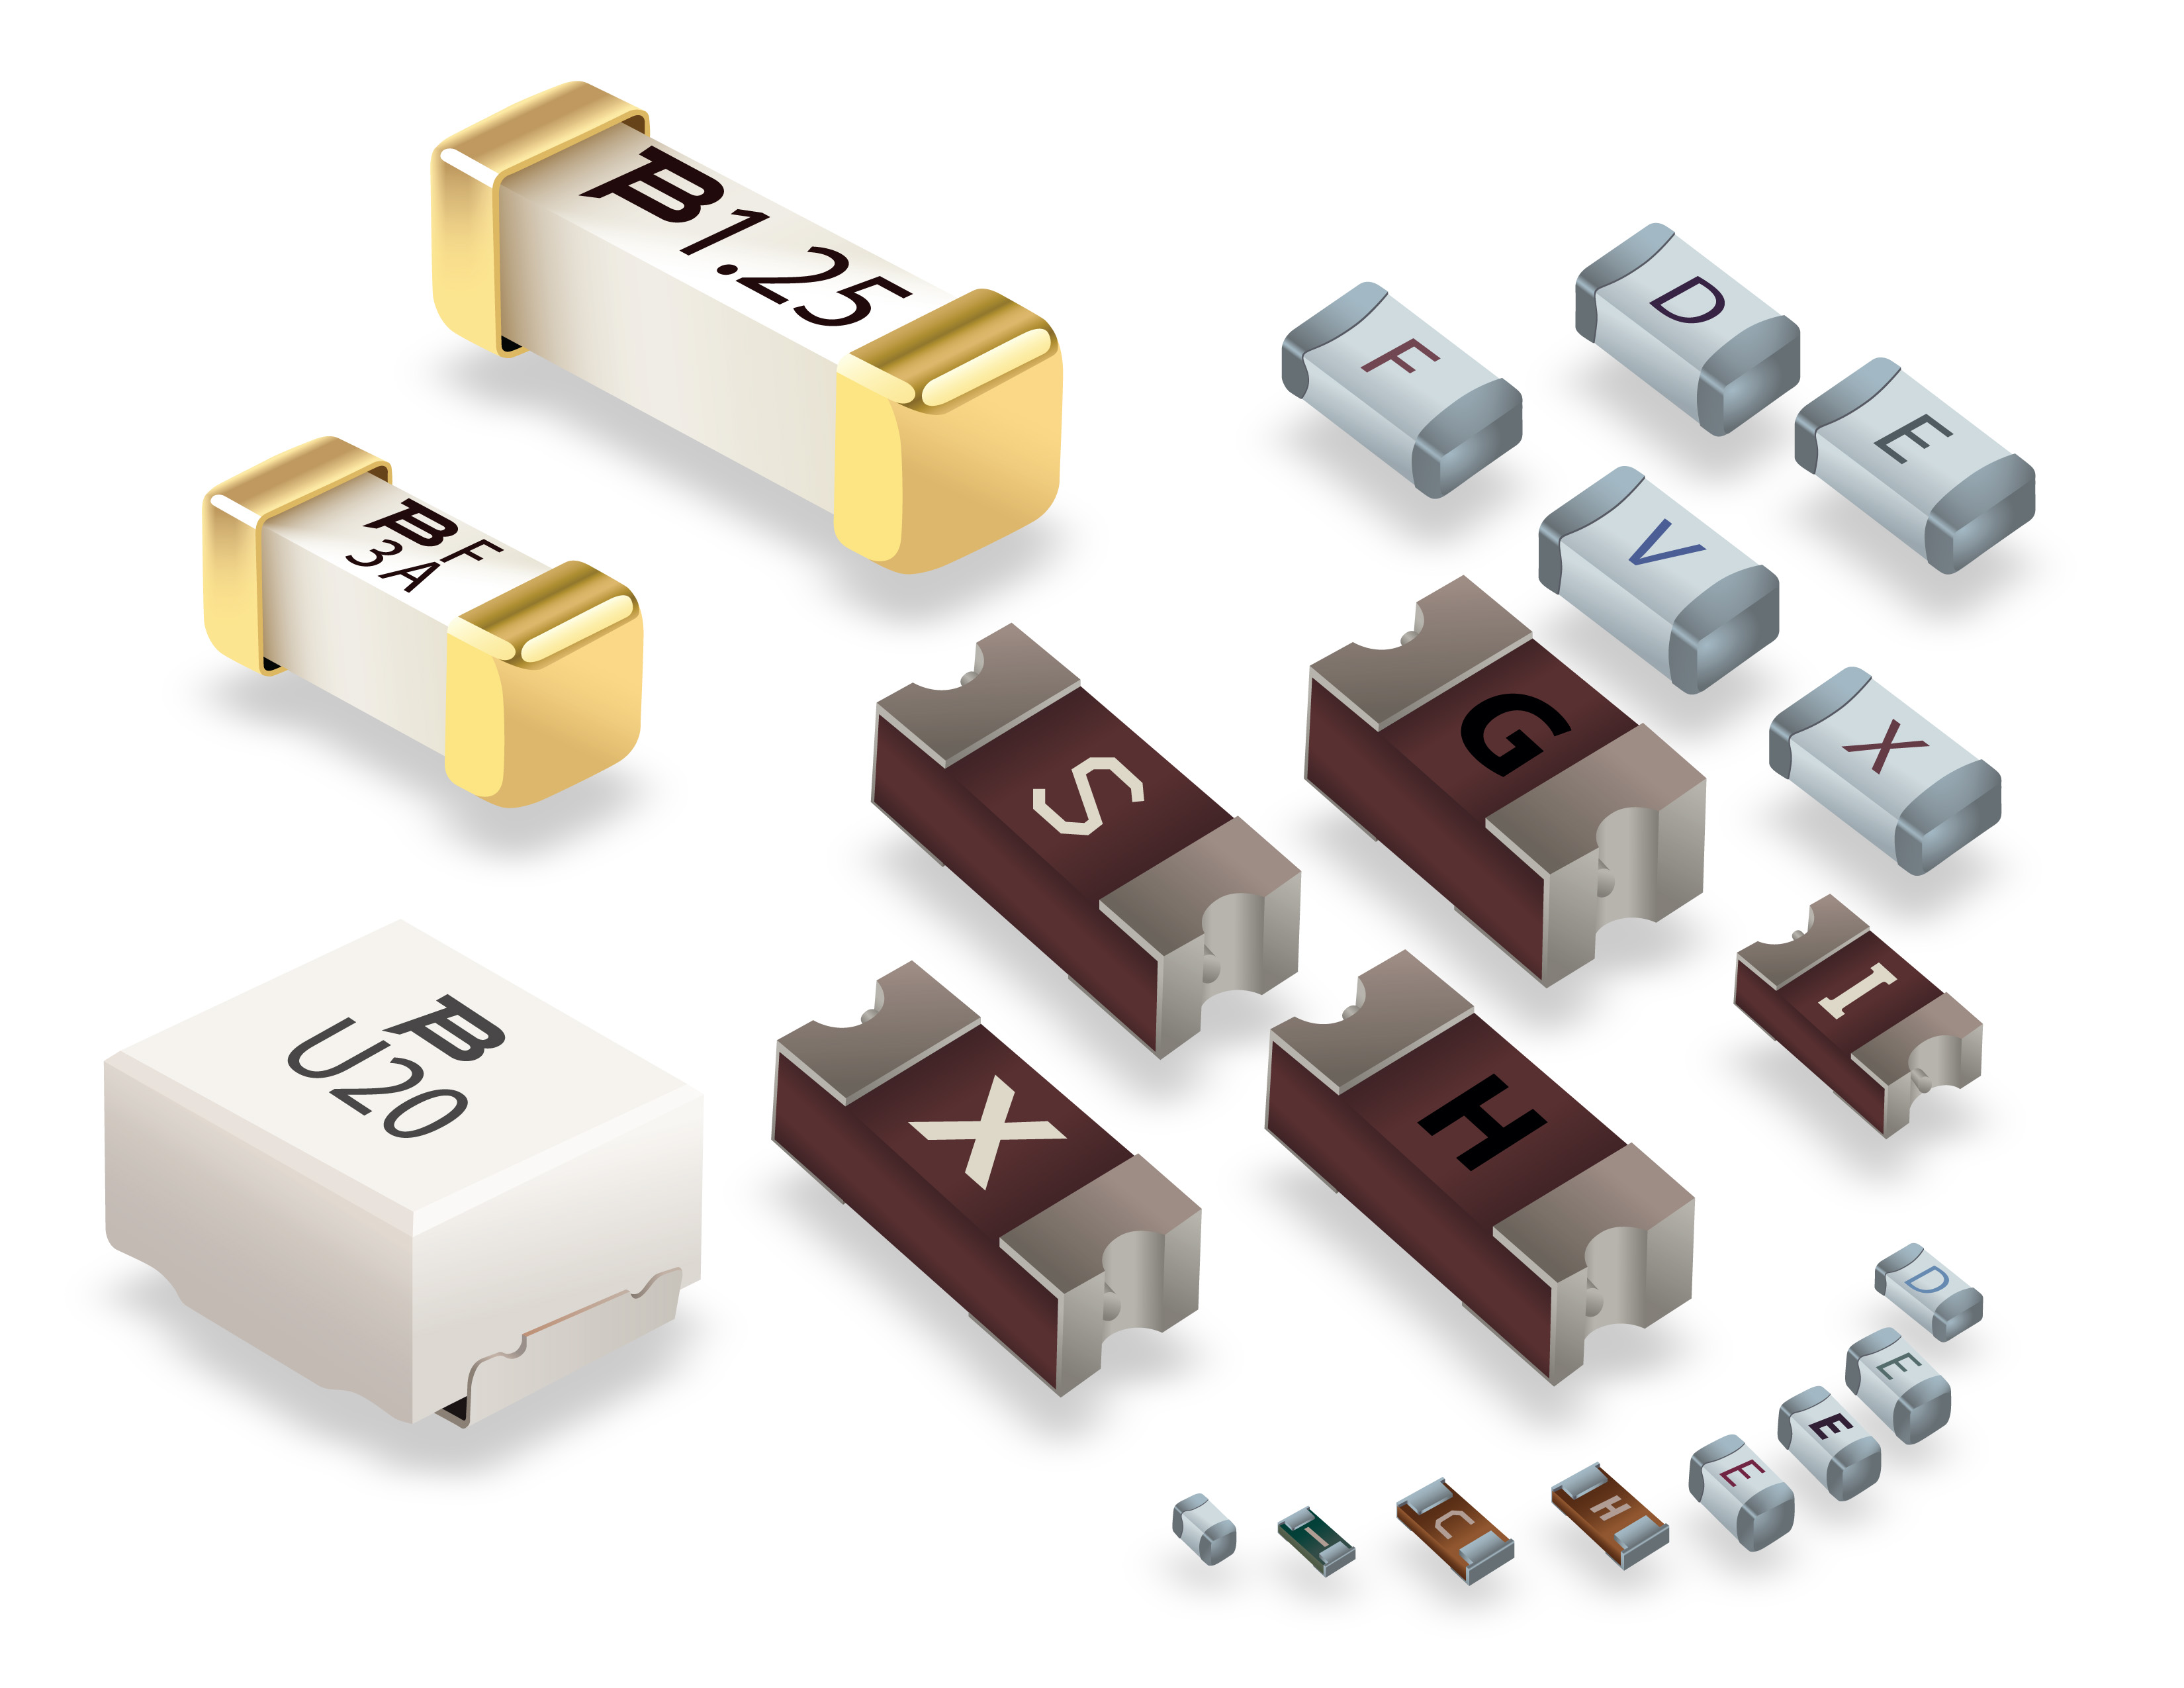 Significantly Expanded SinglFuse Overcurrent Protection Line